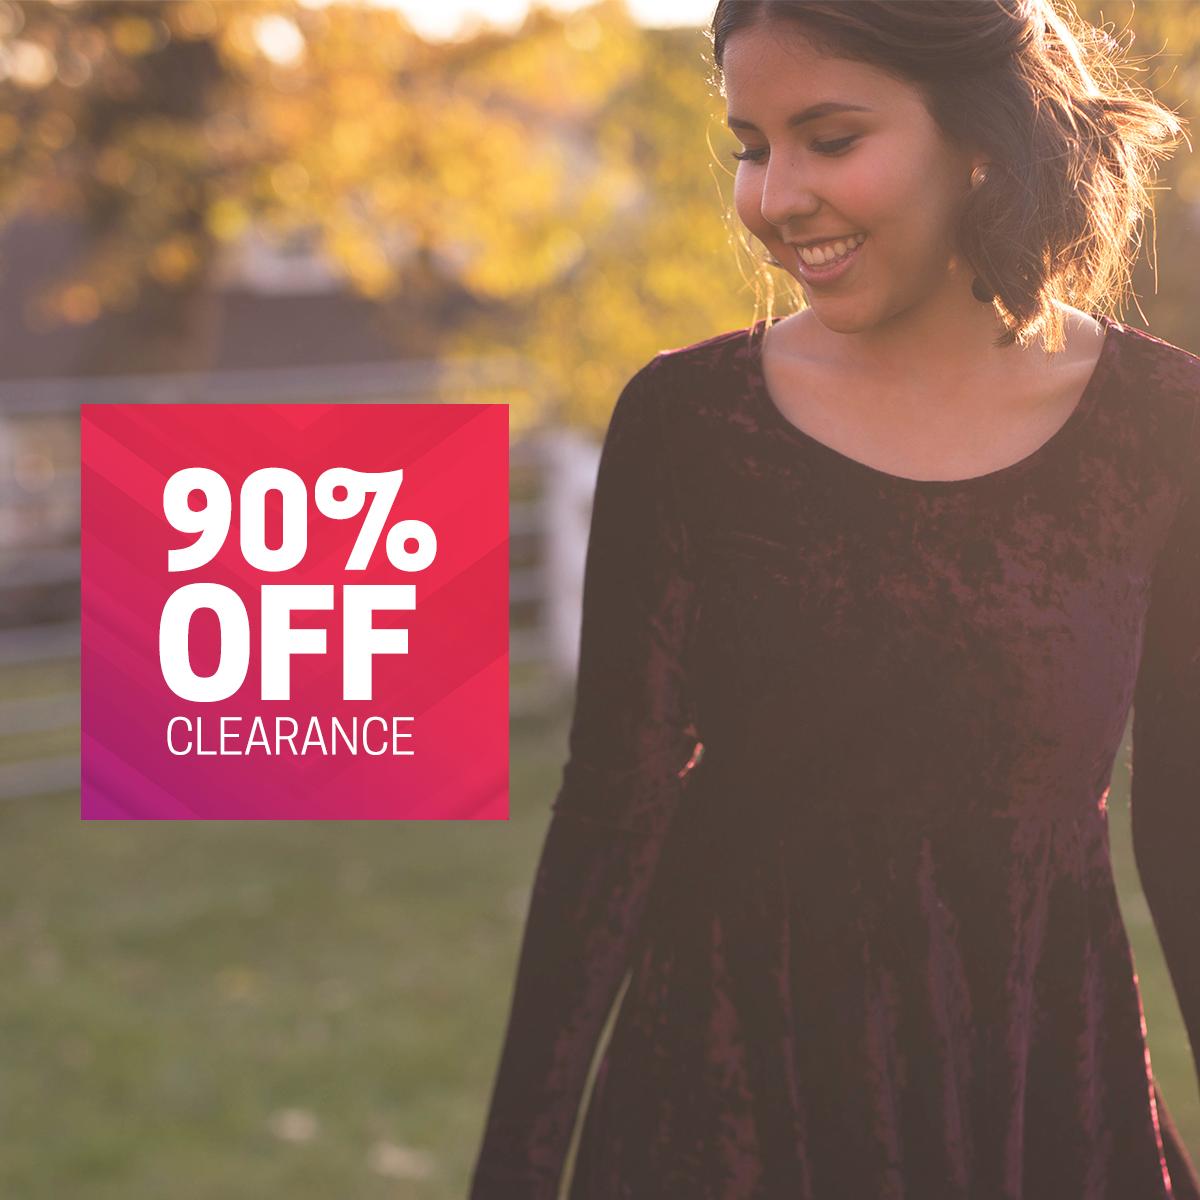 Hurry in this Saturday and Sunday! Plato's Closet Palm Desert has select clearance items at an additional 90% off! This weekend only! #platosclosetpalmdesert #youngadultstyle #trendy #recycleyourstyle